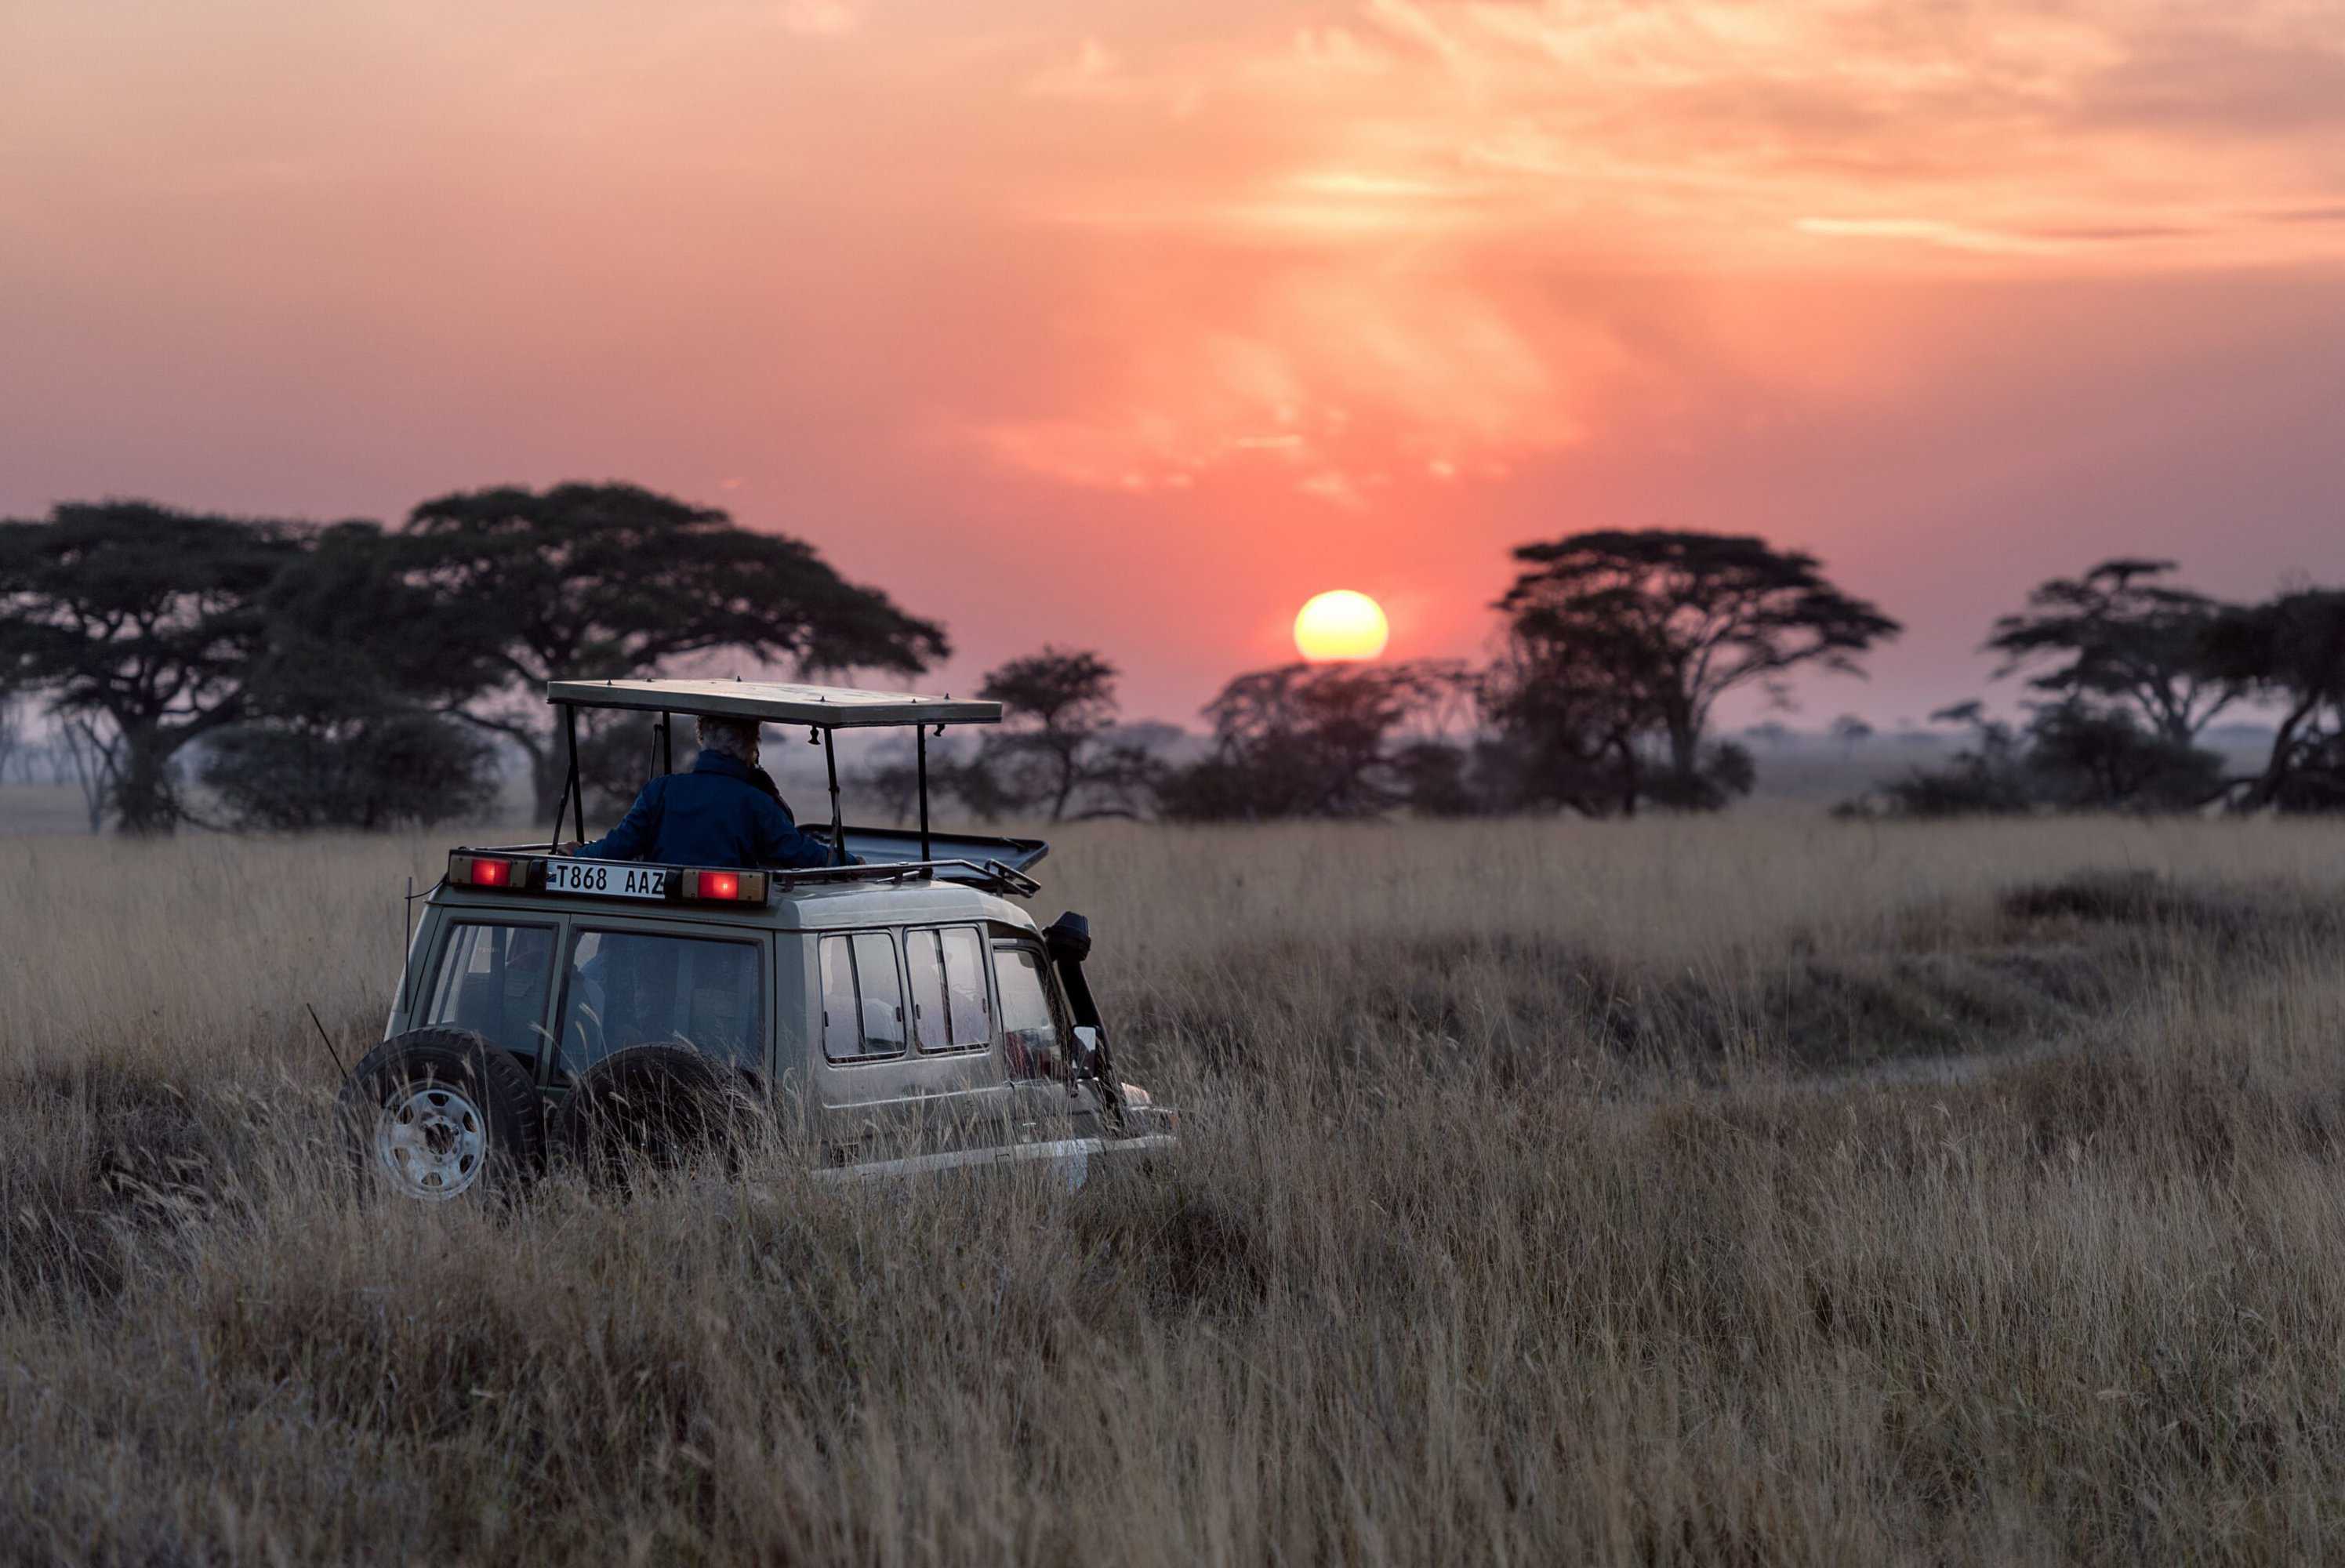 Someone in a jeep doing a safari tour while the sun is setting.